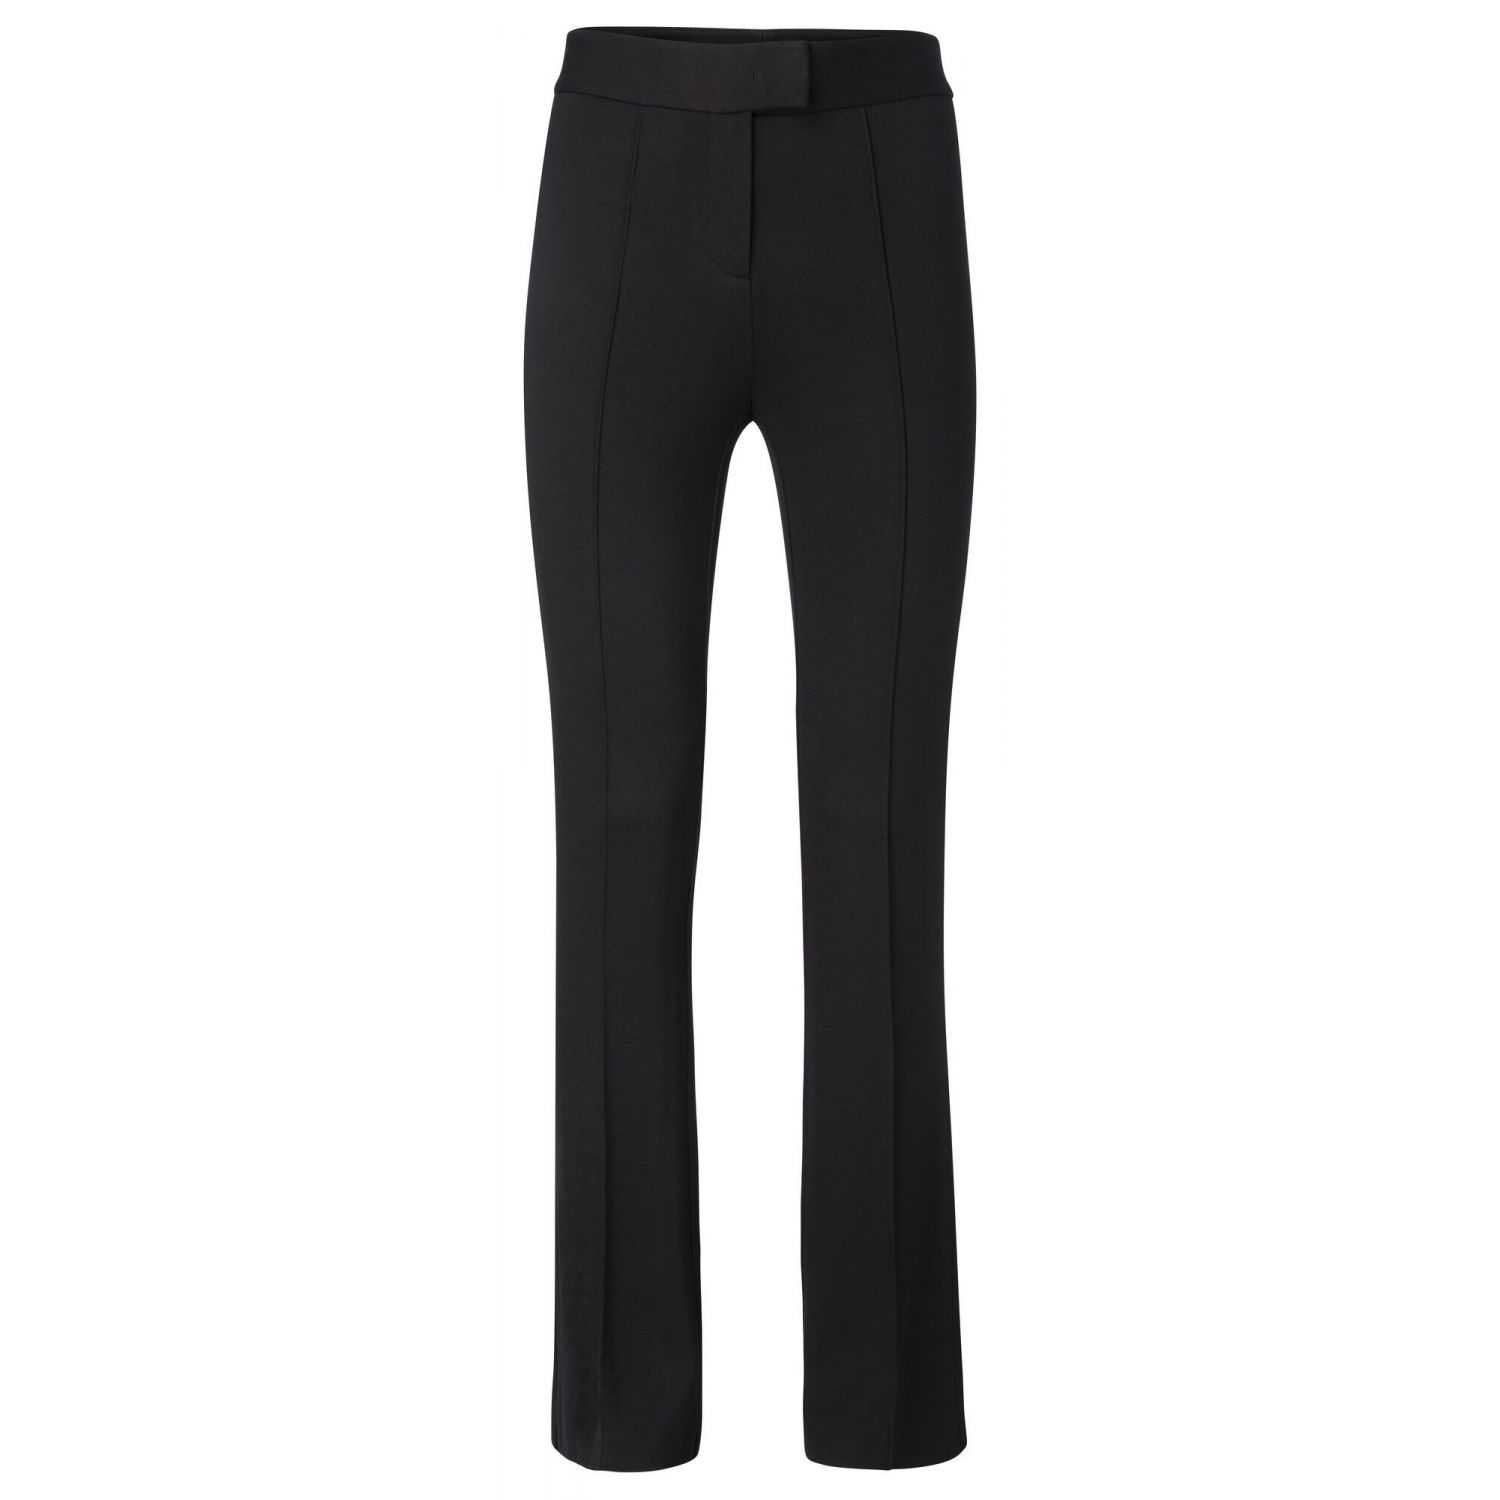 Yaya flared trousers with side stripes black